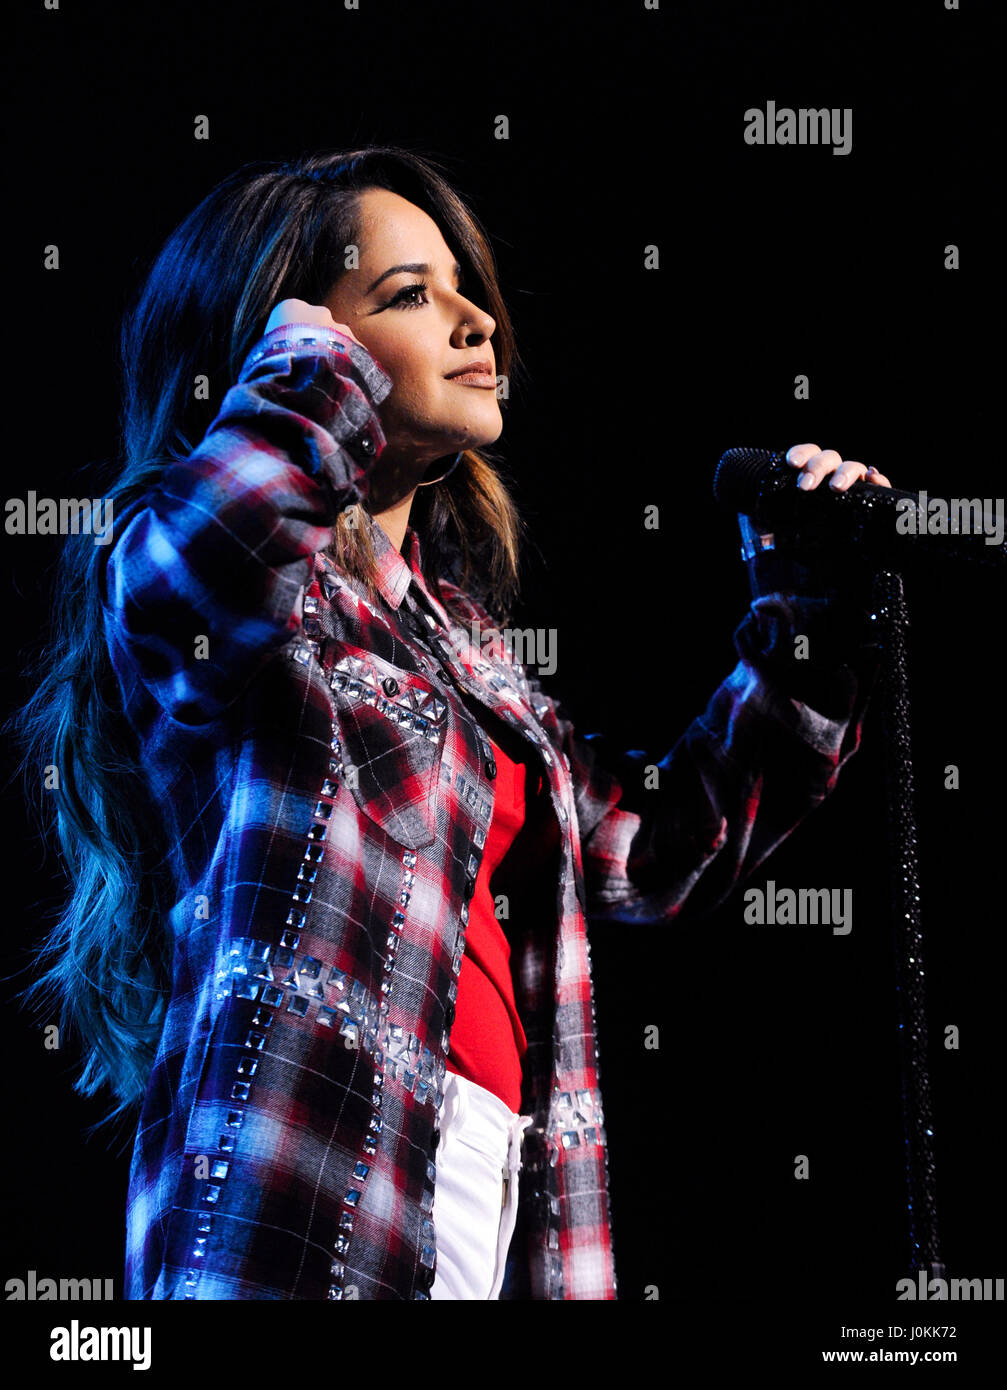 Singer Becky G performs live at The Salvation Army #|#Rock The Red Kettle#|# Concert at Microsoft Theater on December 5th, 2015 in Los Angeles, California. Stock Photo